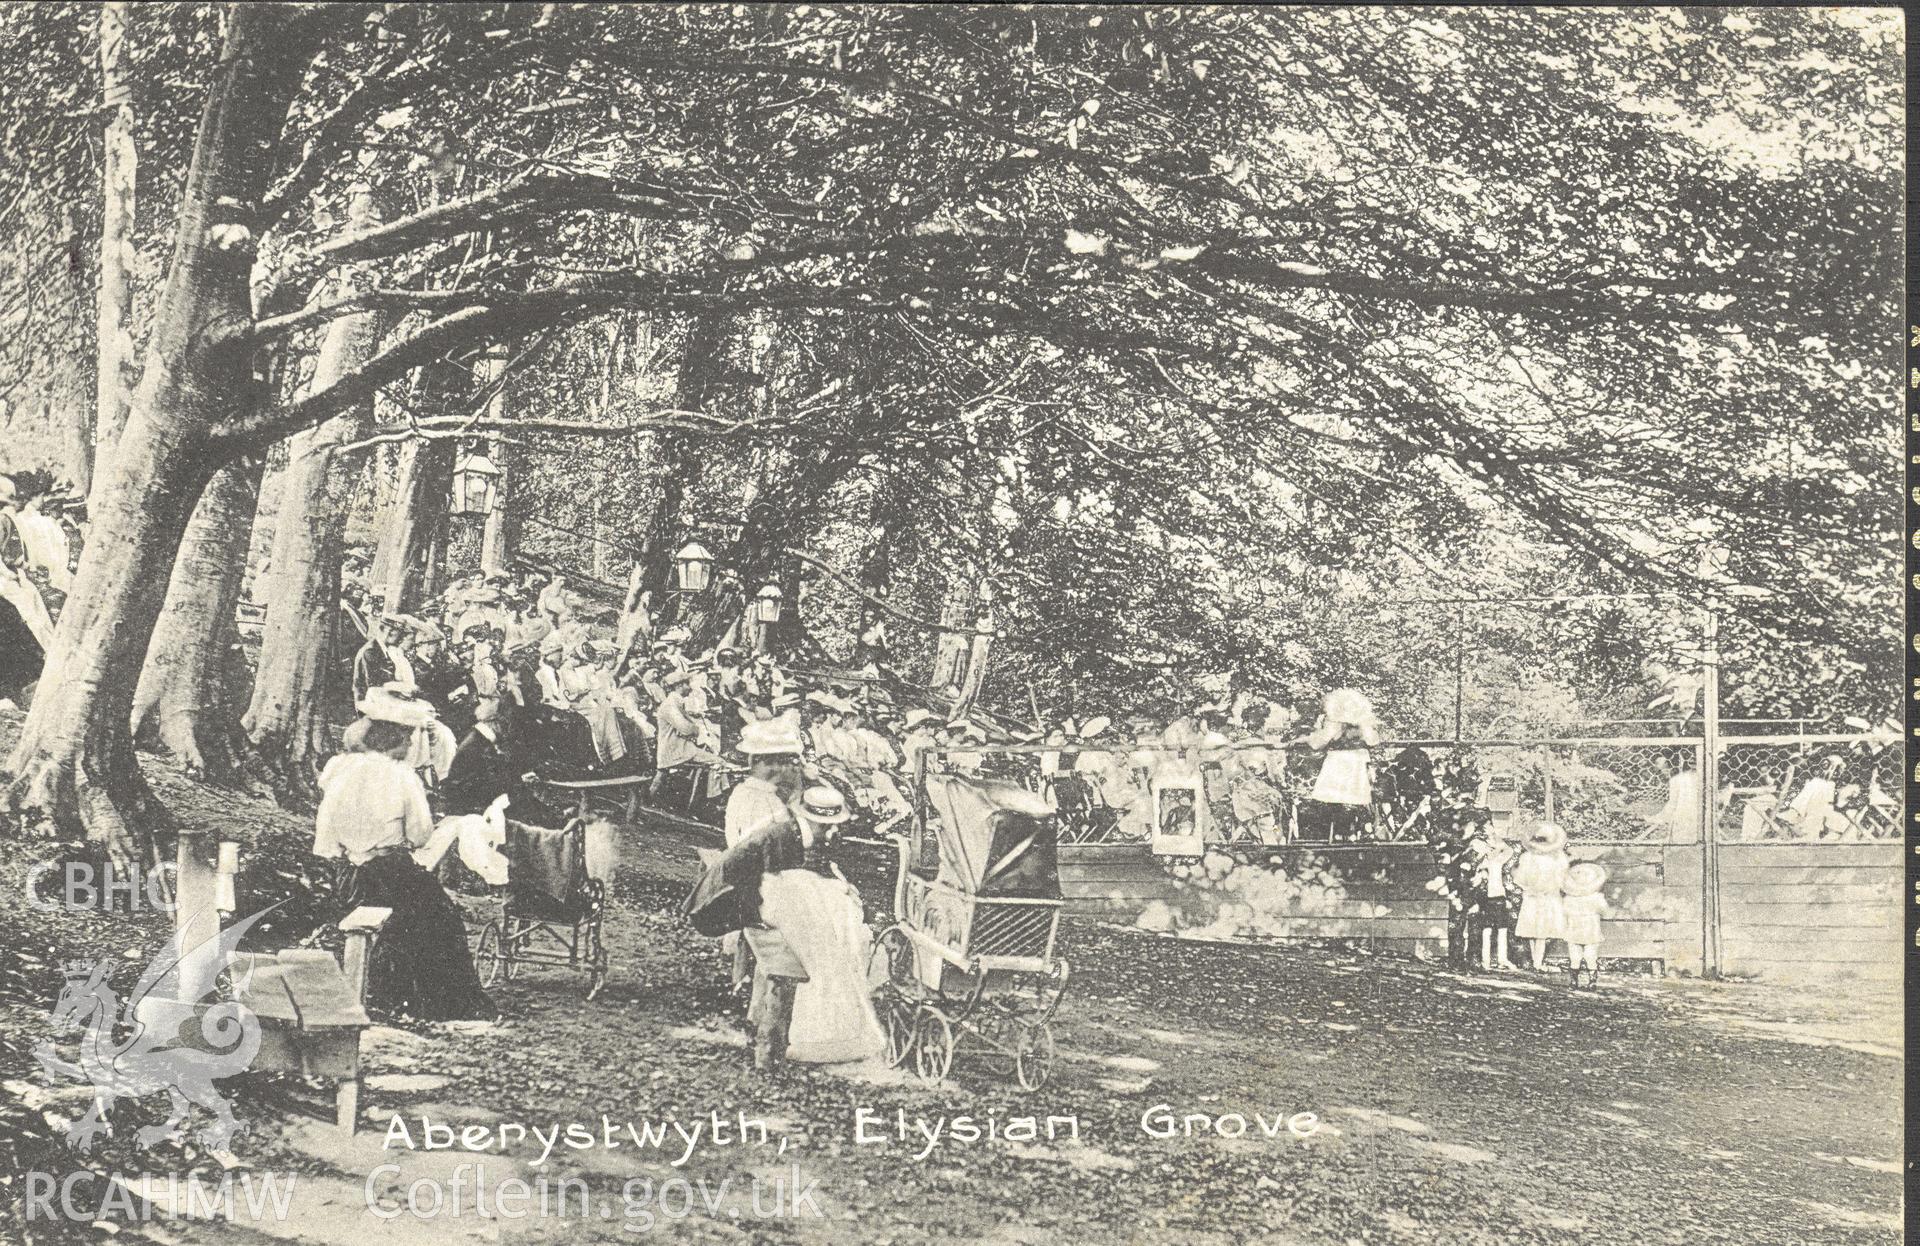 Digitised postcard image of the Elysian Grove, Aberystwyth, Frank Phillips Series, Aberystwyth. Produced by Parks and Gardens Data Services, from an original item in the Peter Davis Collection at Parks and Gardens UK. We hold only web-resolution images of this collection, suitable for viewing on screen and for research purposes only. We do not hold the original images, or publication quality scans.